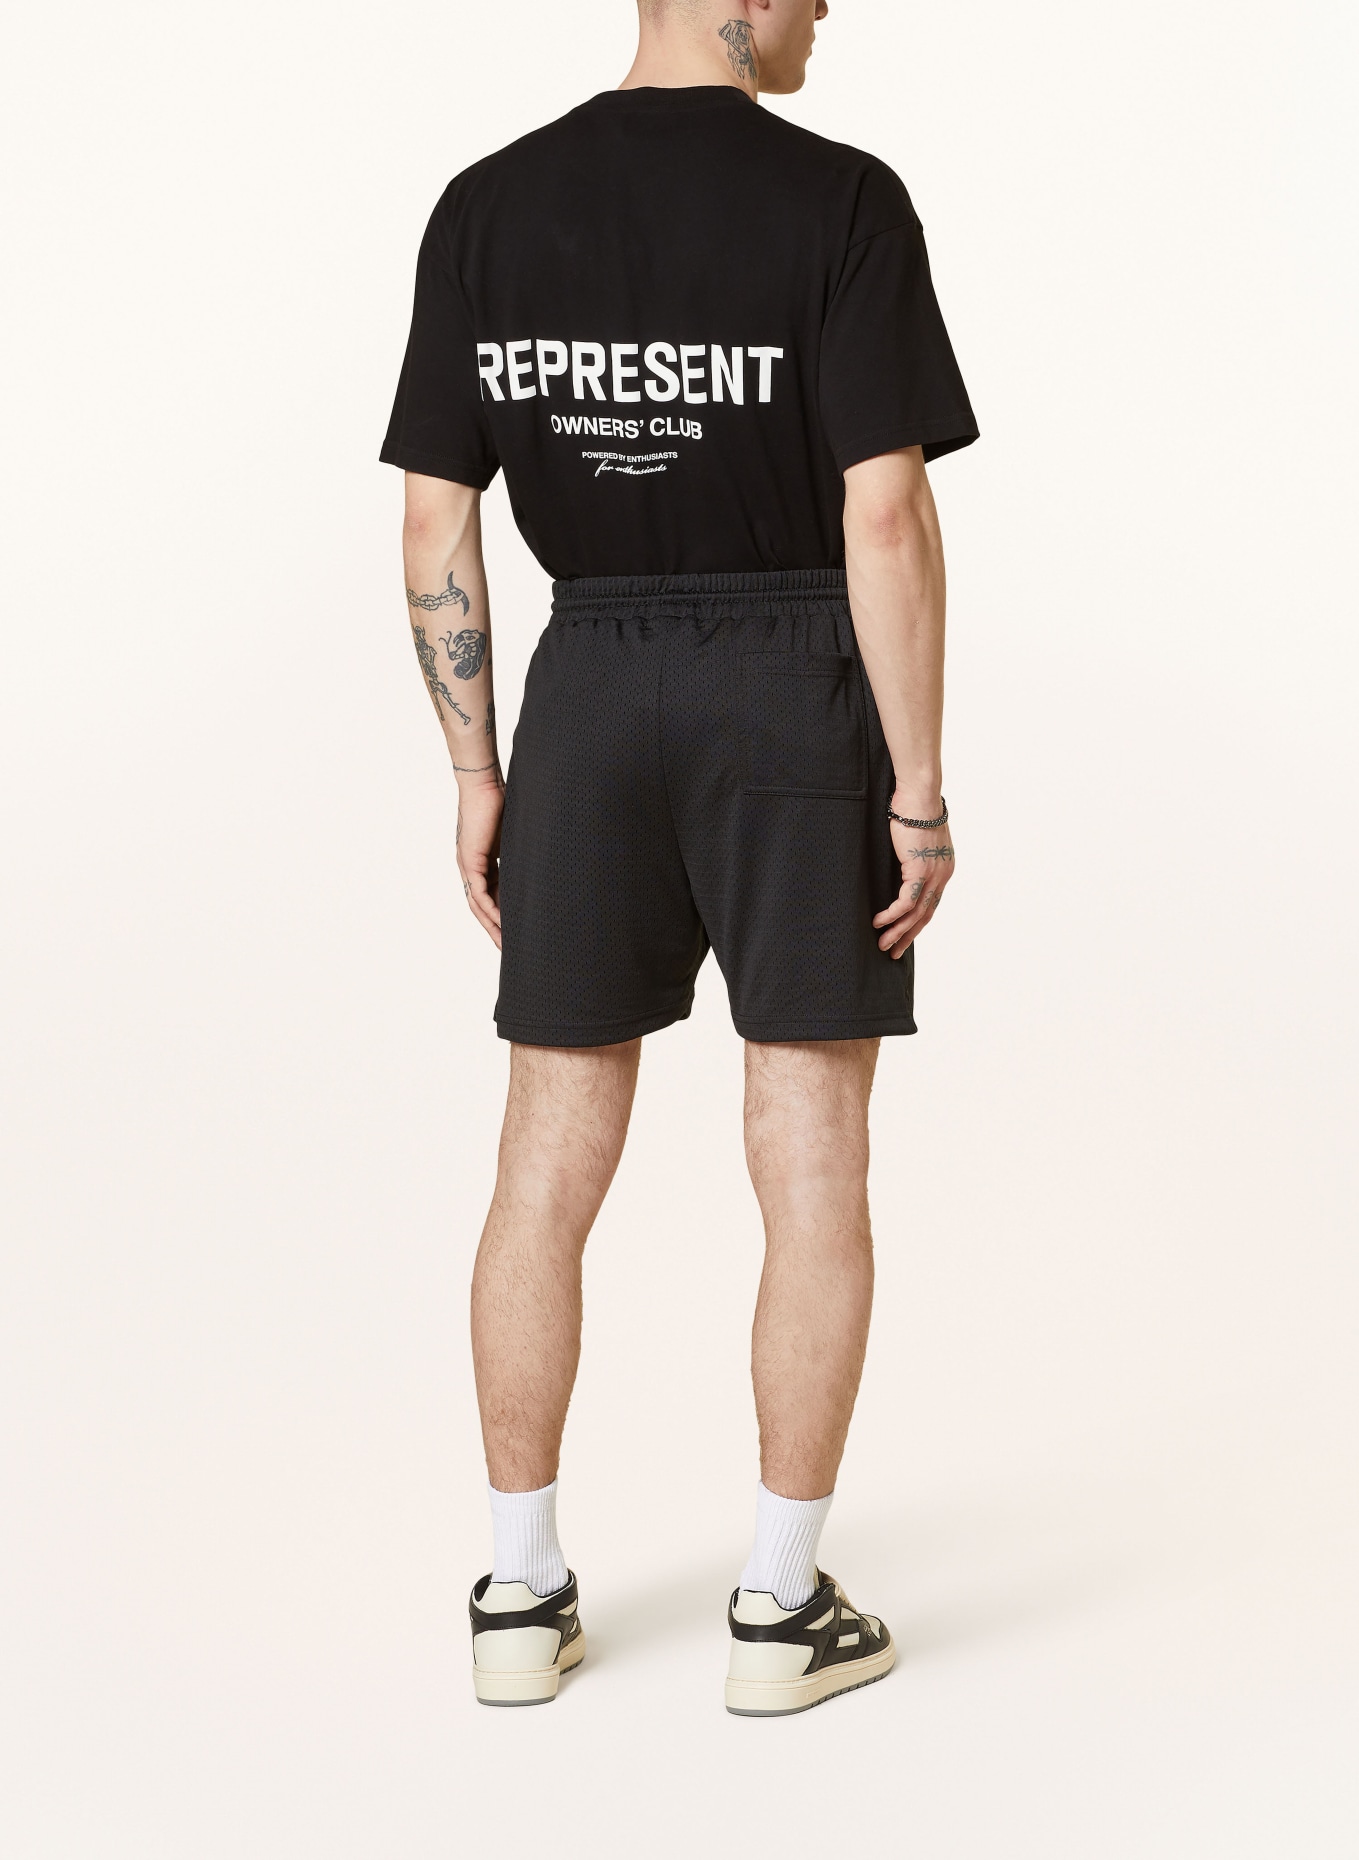 REPRESENT Shorts OWNERS CLUB, Color: BLACK (Image 3)